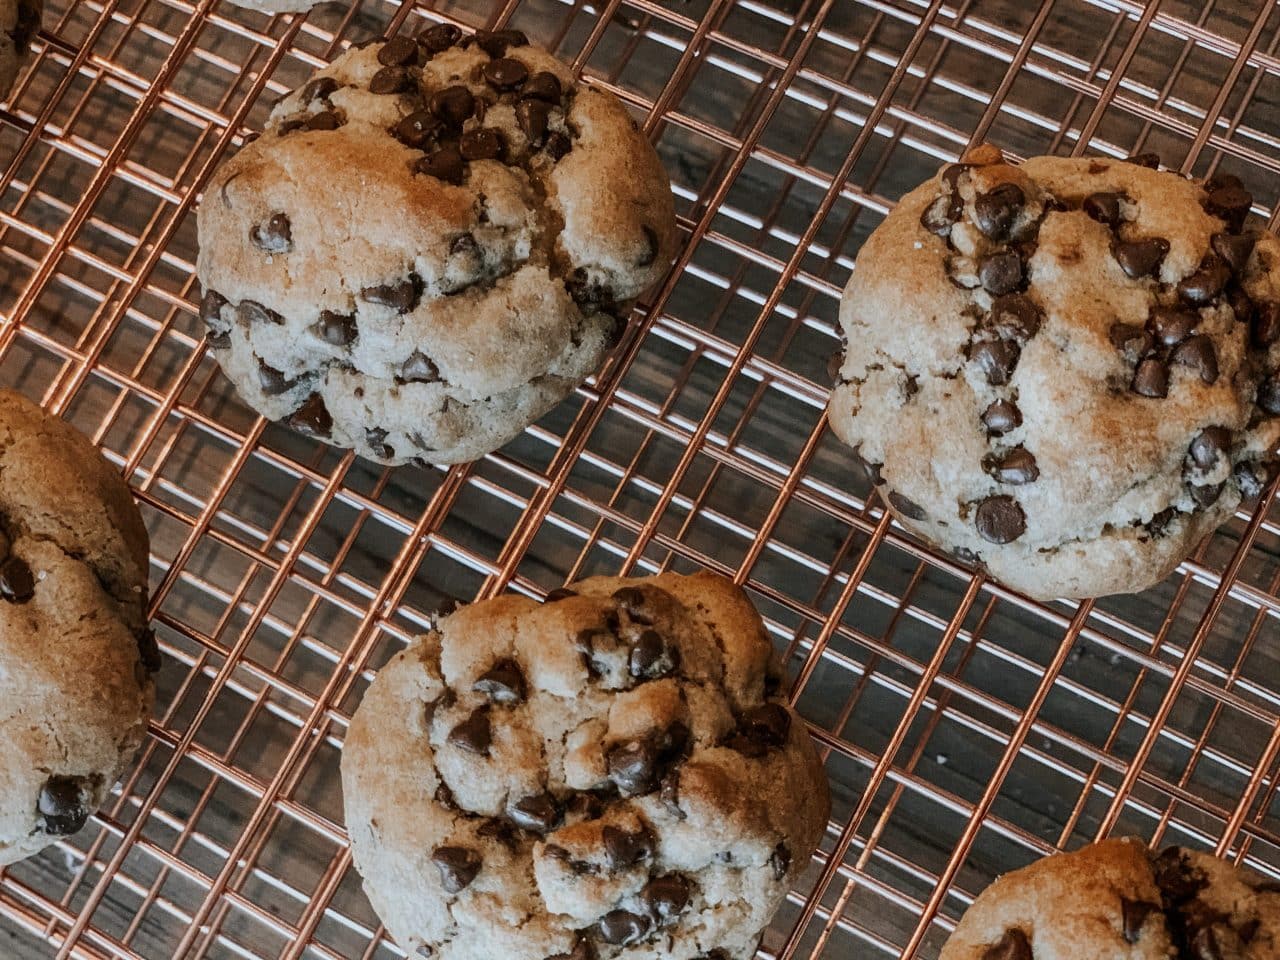 The Best Chocolate Chip Cookies – Kristyn Cole